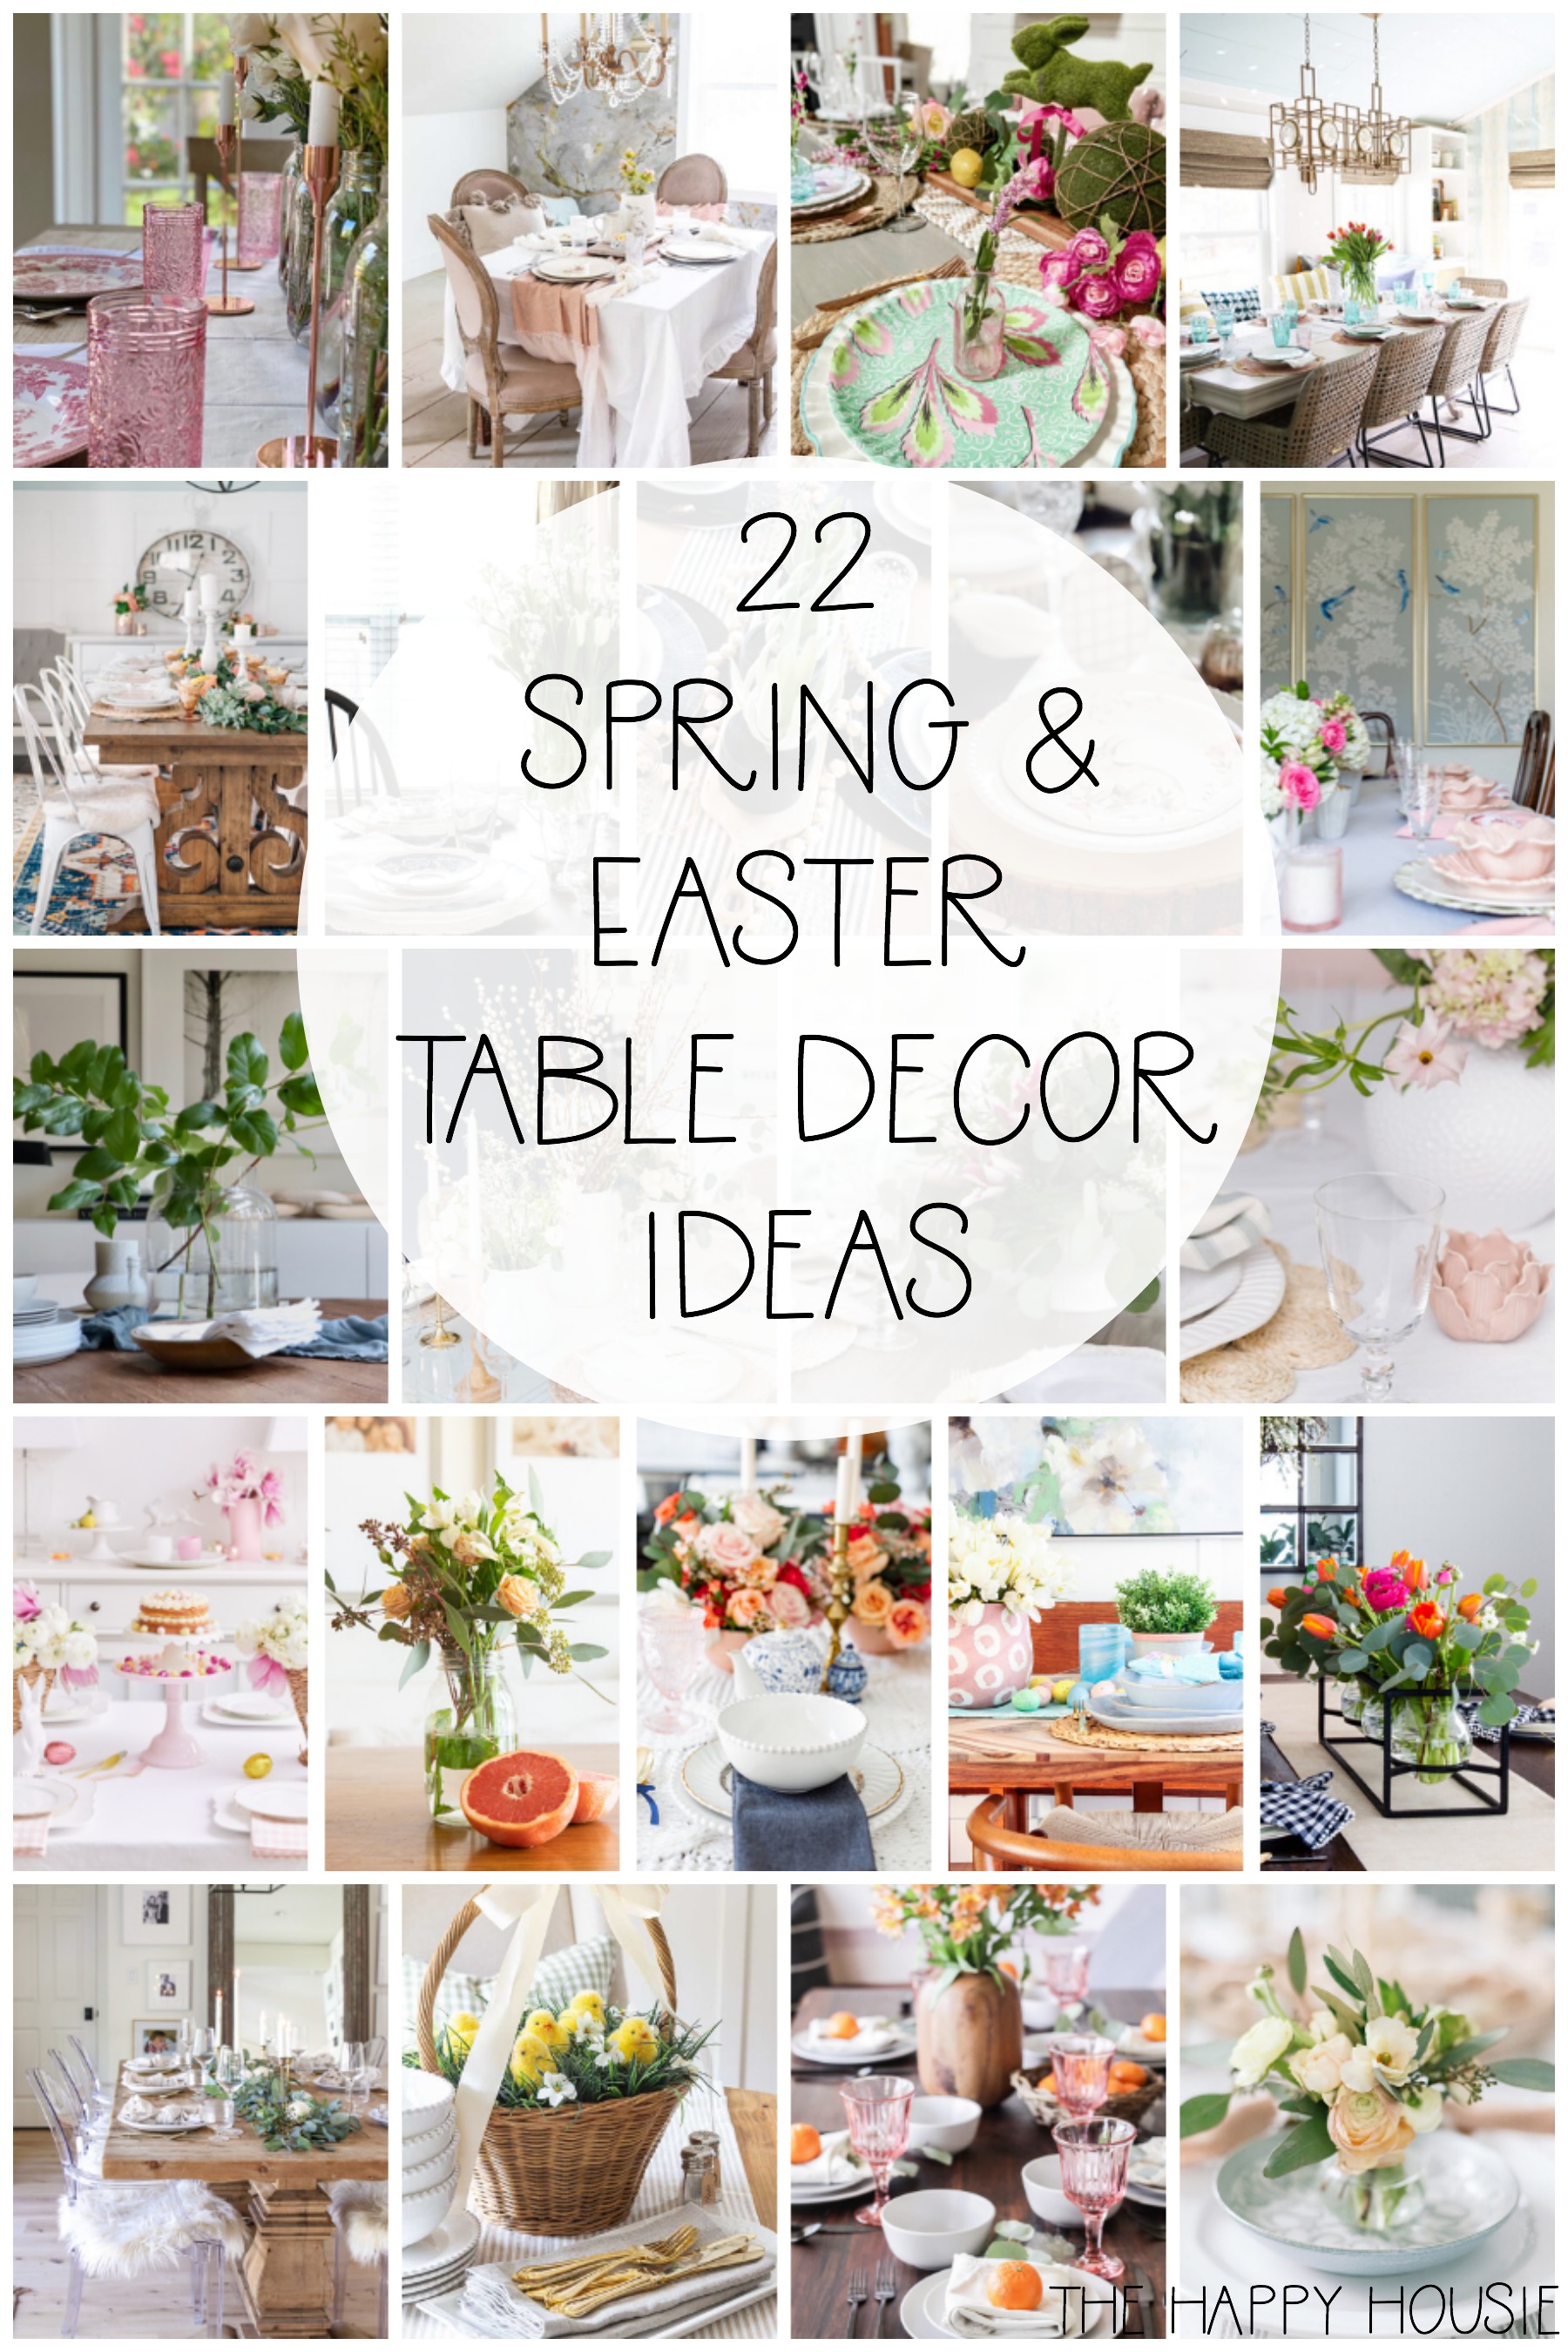 22 Spring & Easter Table Decor Ideas poster.